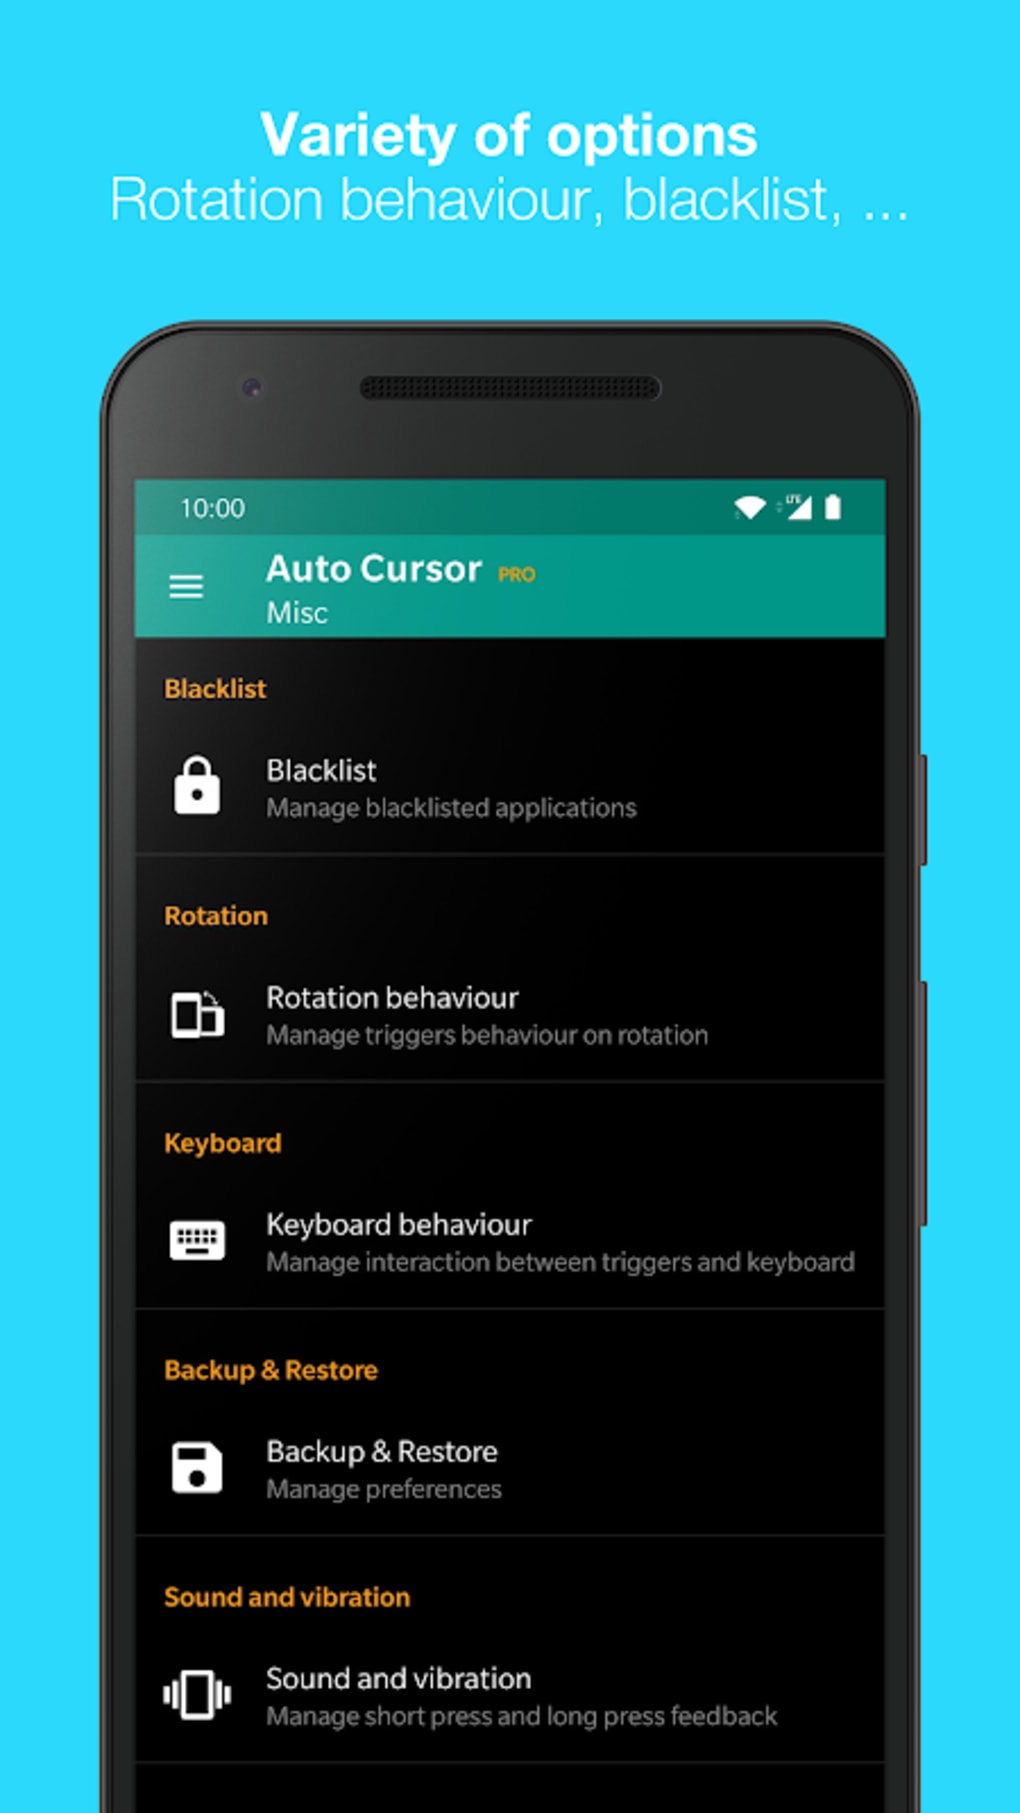 Auto Cursor APK for Android Download